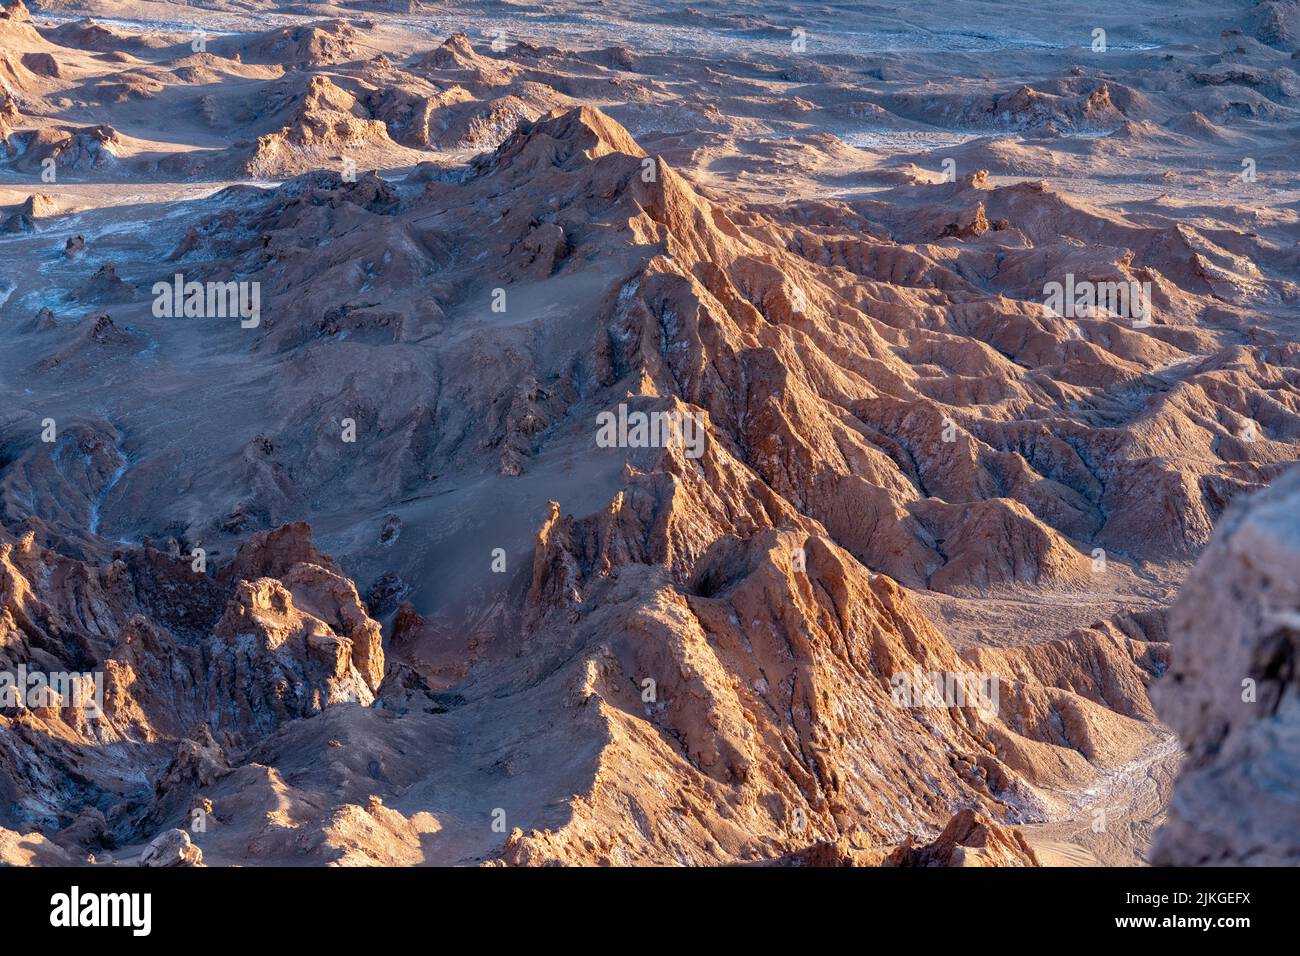 Eroded landscape of the Valley of the Moon or Valle de la Luna from the Coyote Rock Overlook, San Pedro de Atacama, Chile. Stock Photo